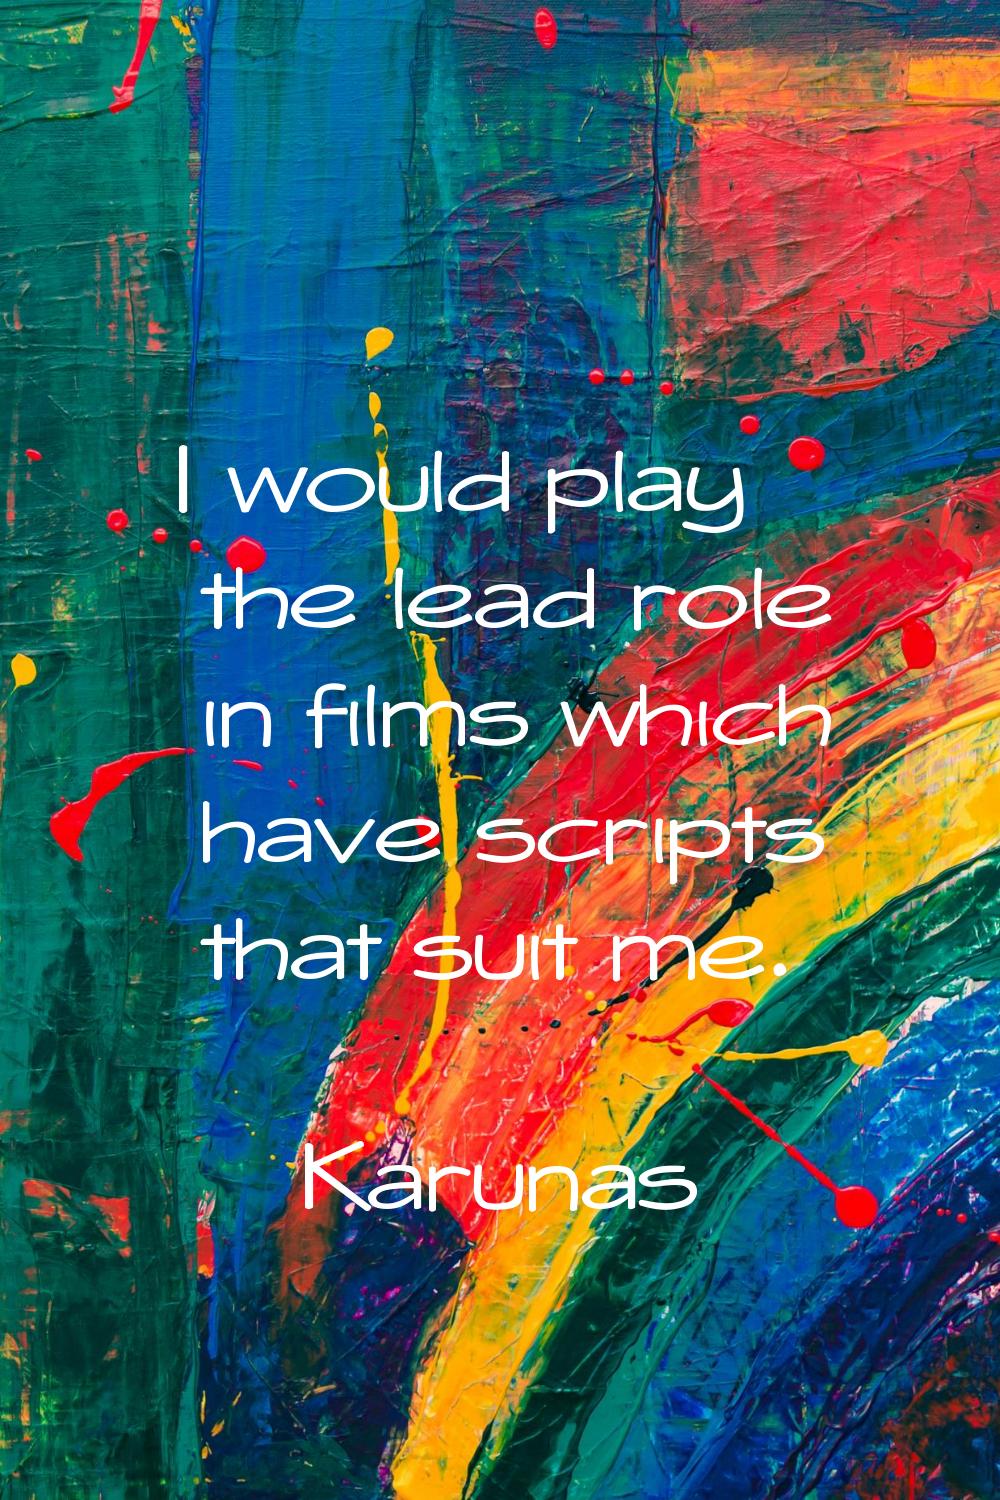 I would play the lead role in films which have scripts that suit me.